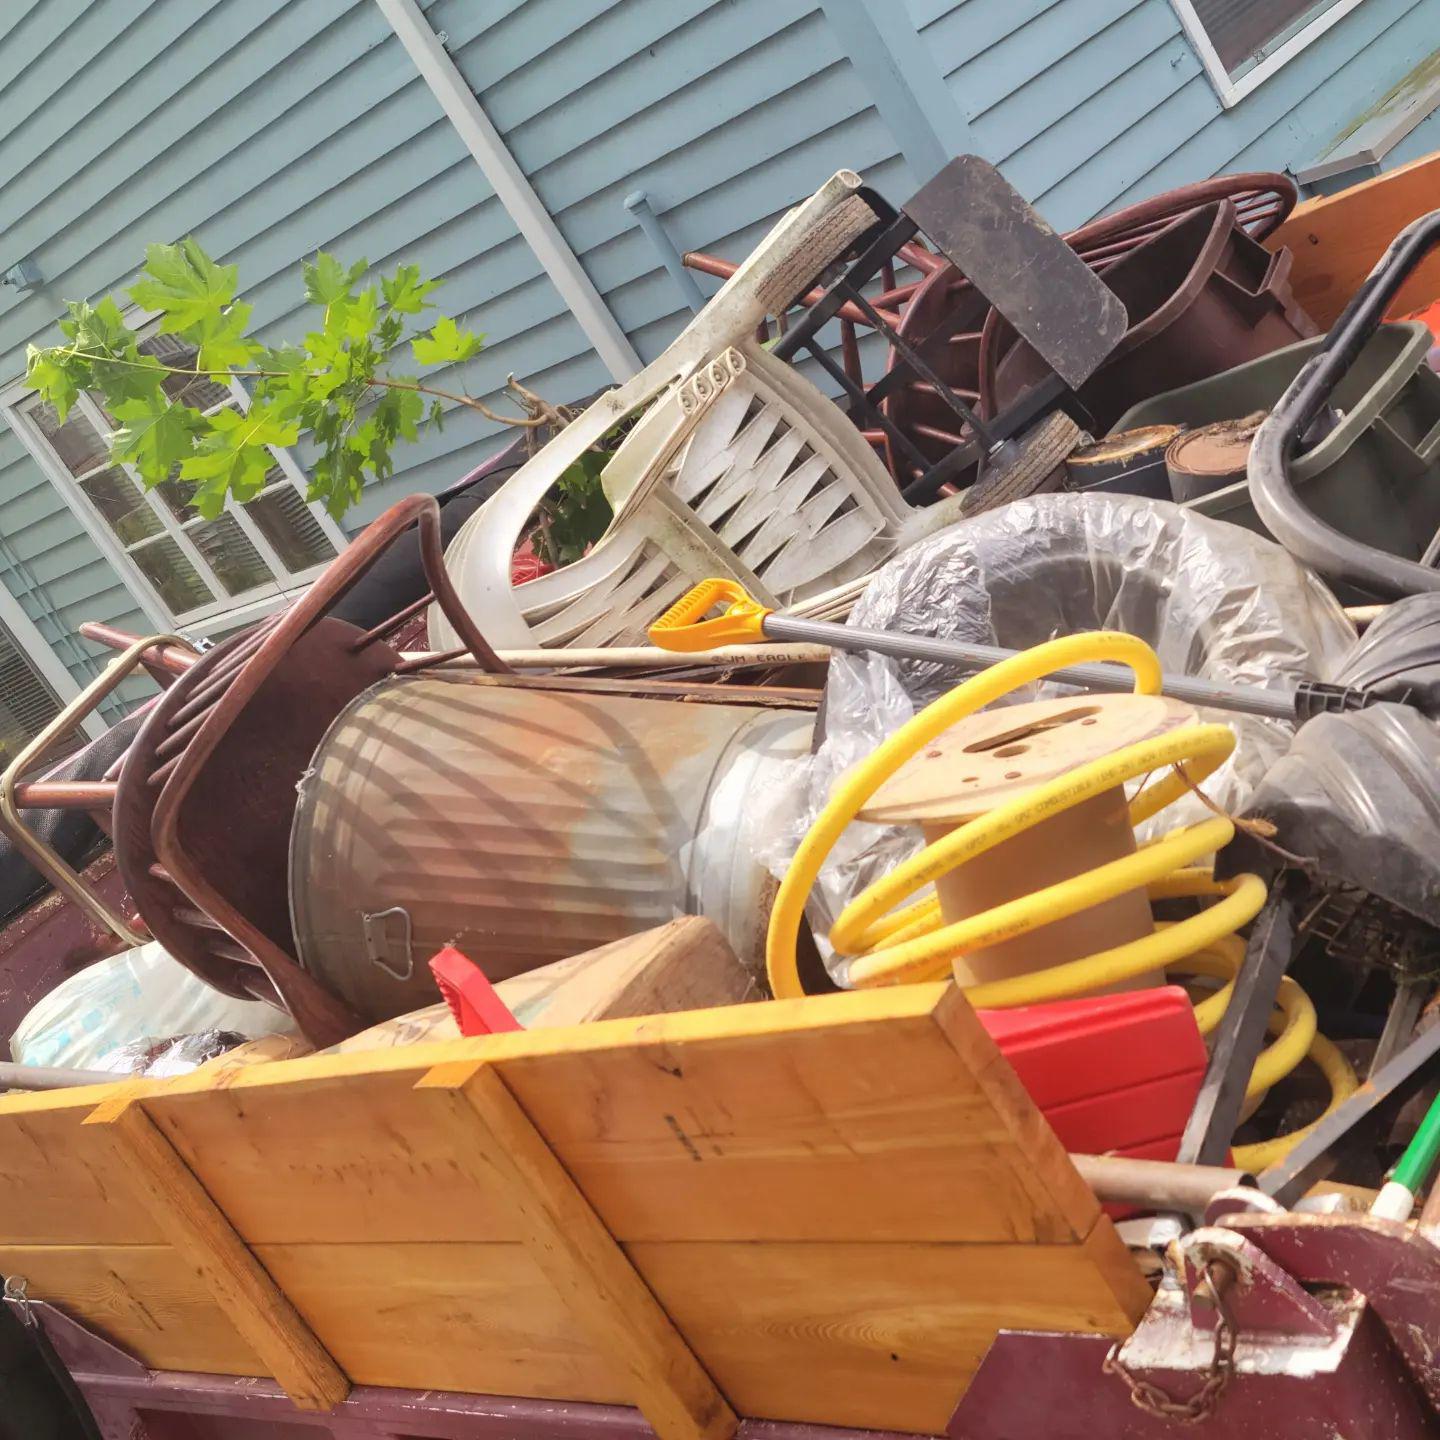 Junk removal made easy! Contact us today!